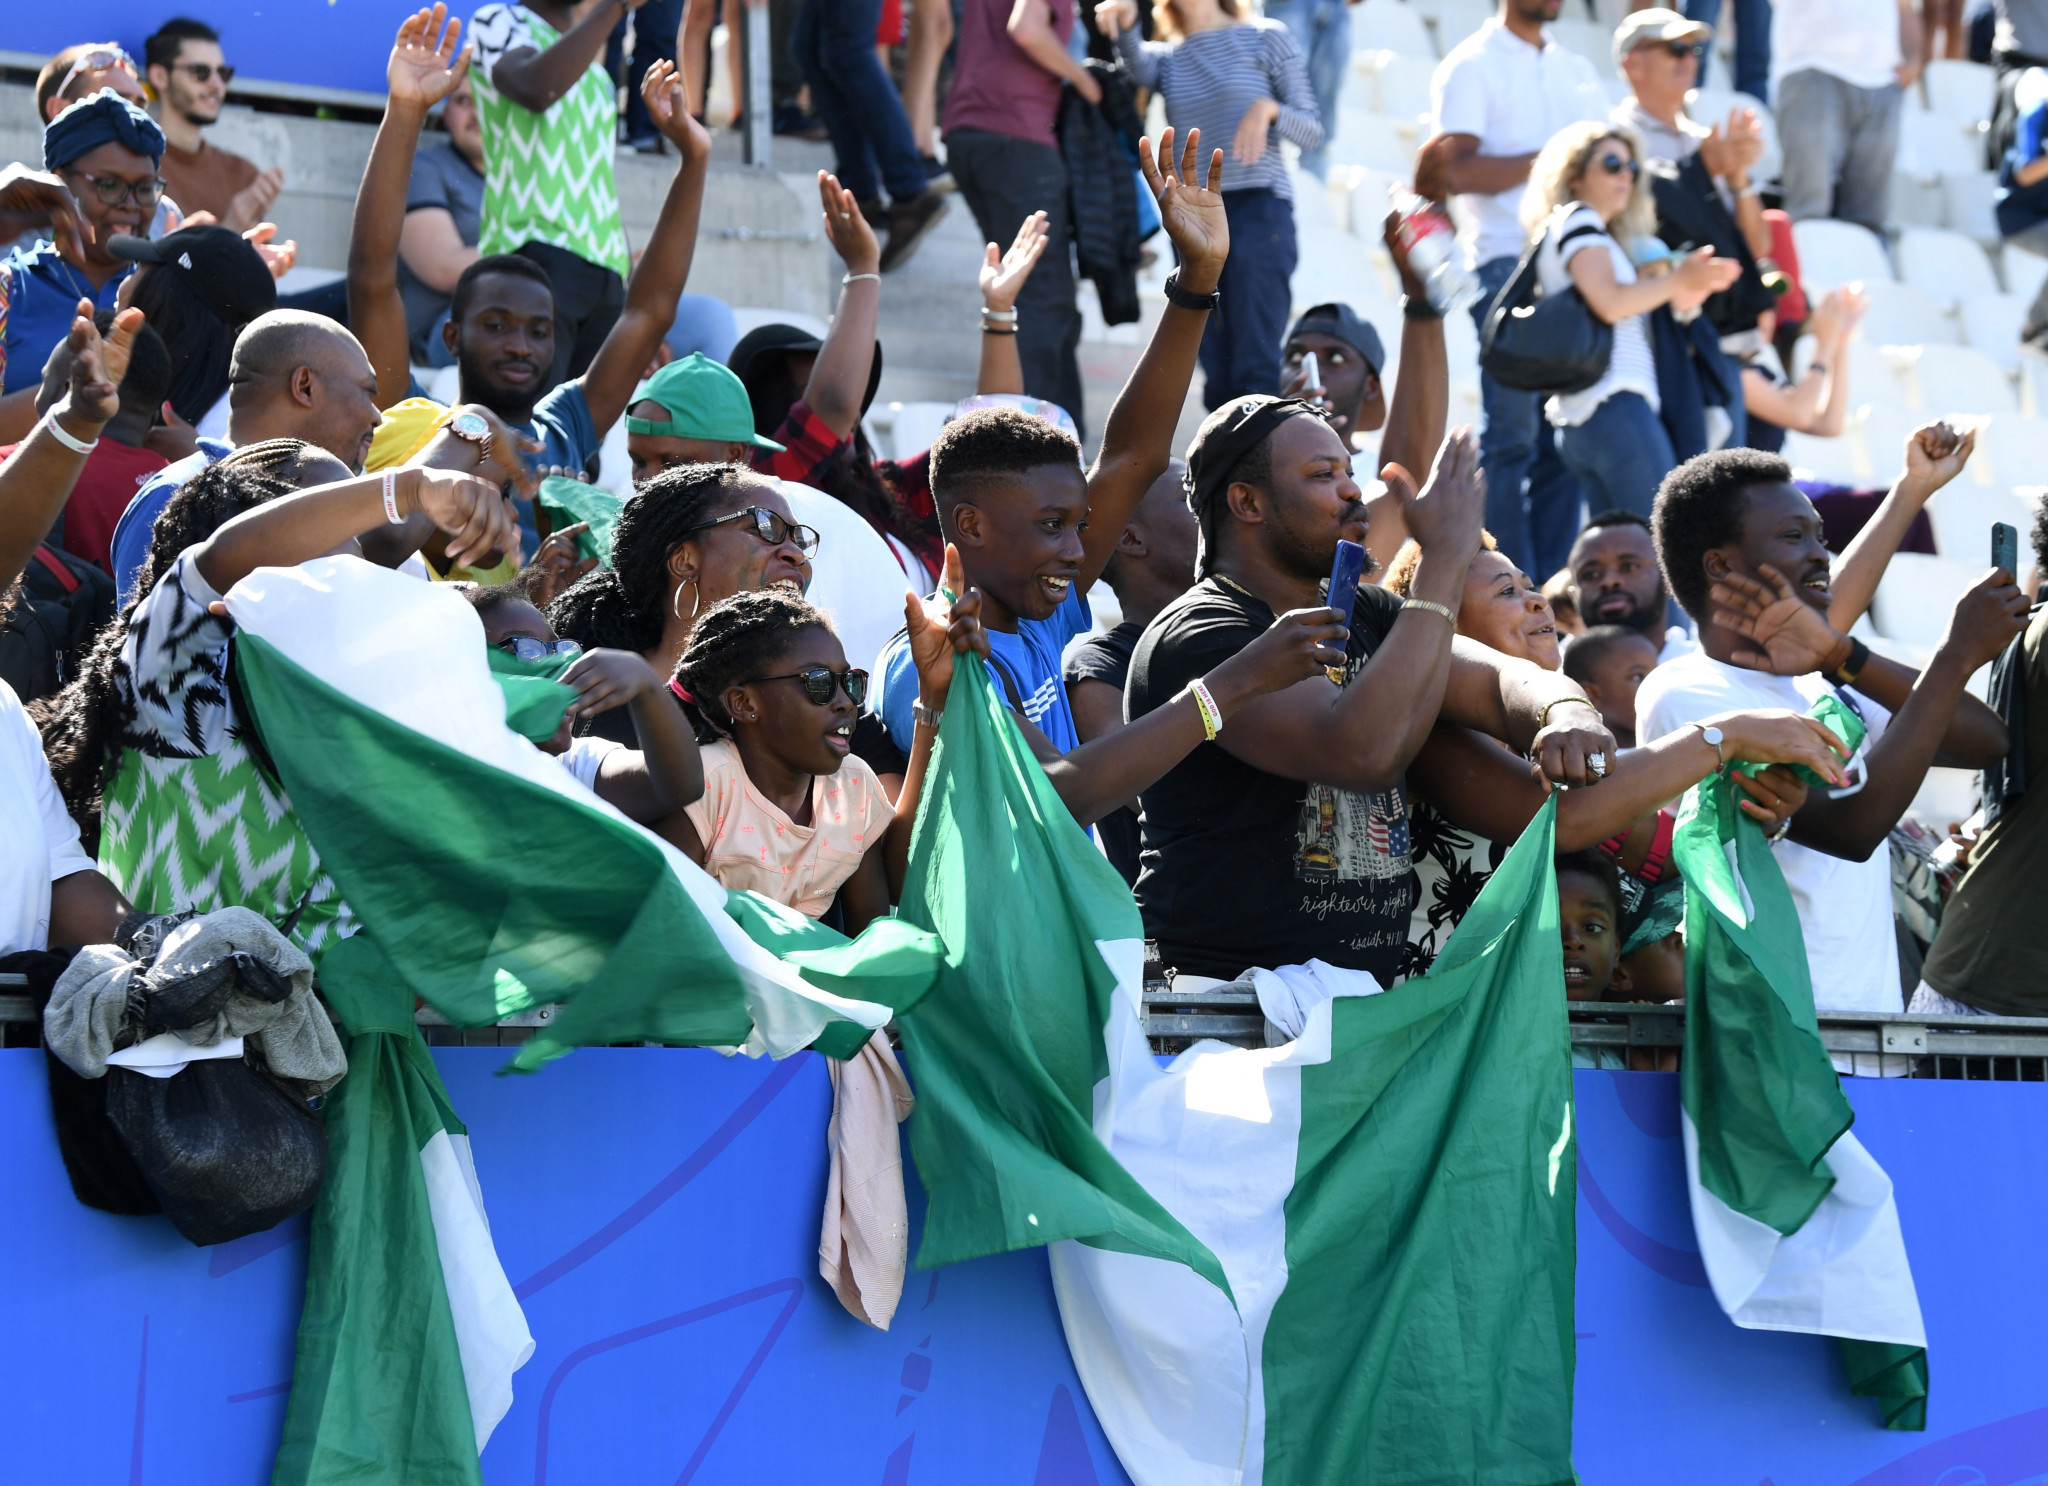 Nigeria have put themselves in with a chance of qualifying for the knockout stages, but face hosts France in their next match ©Getty Images